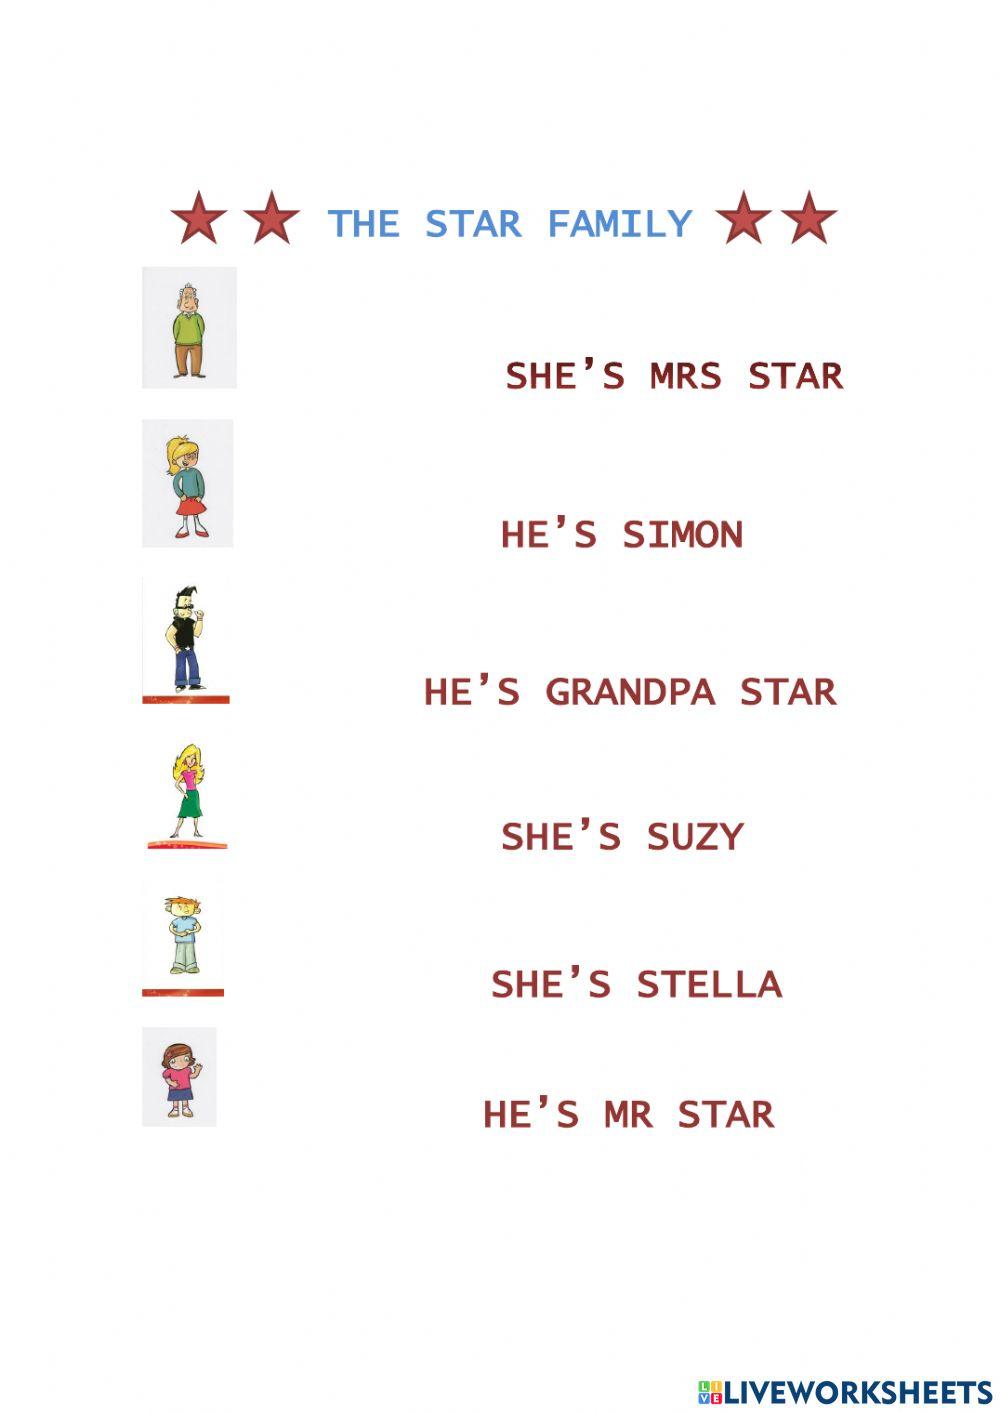 The Star Family